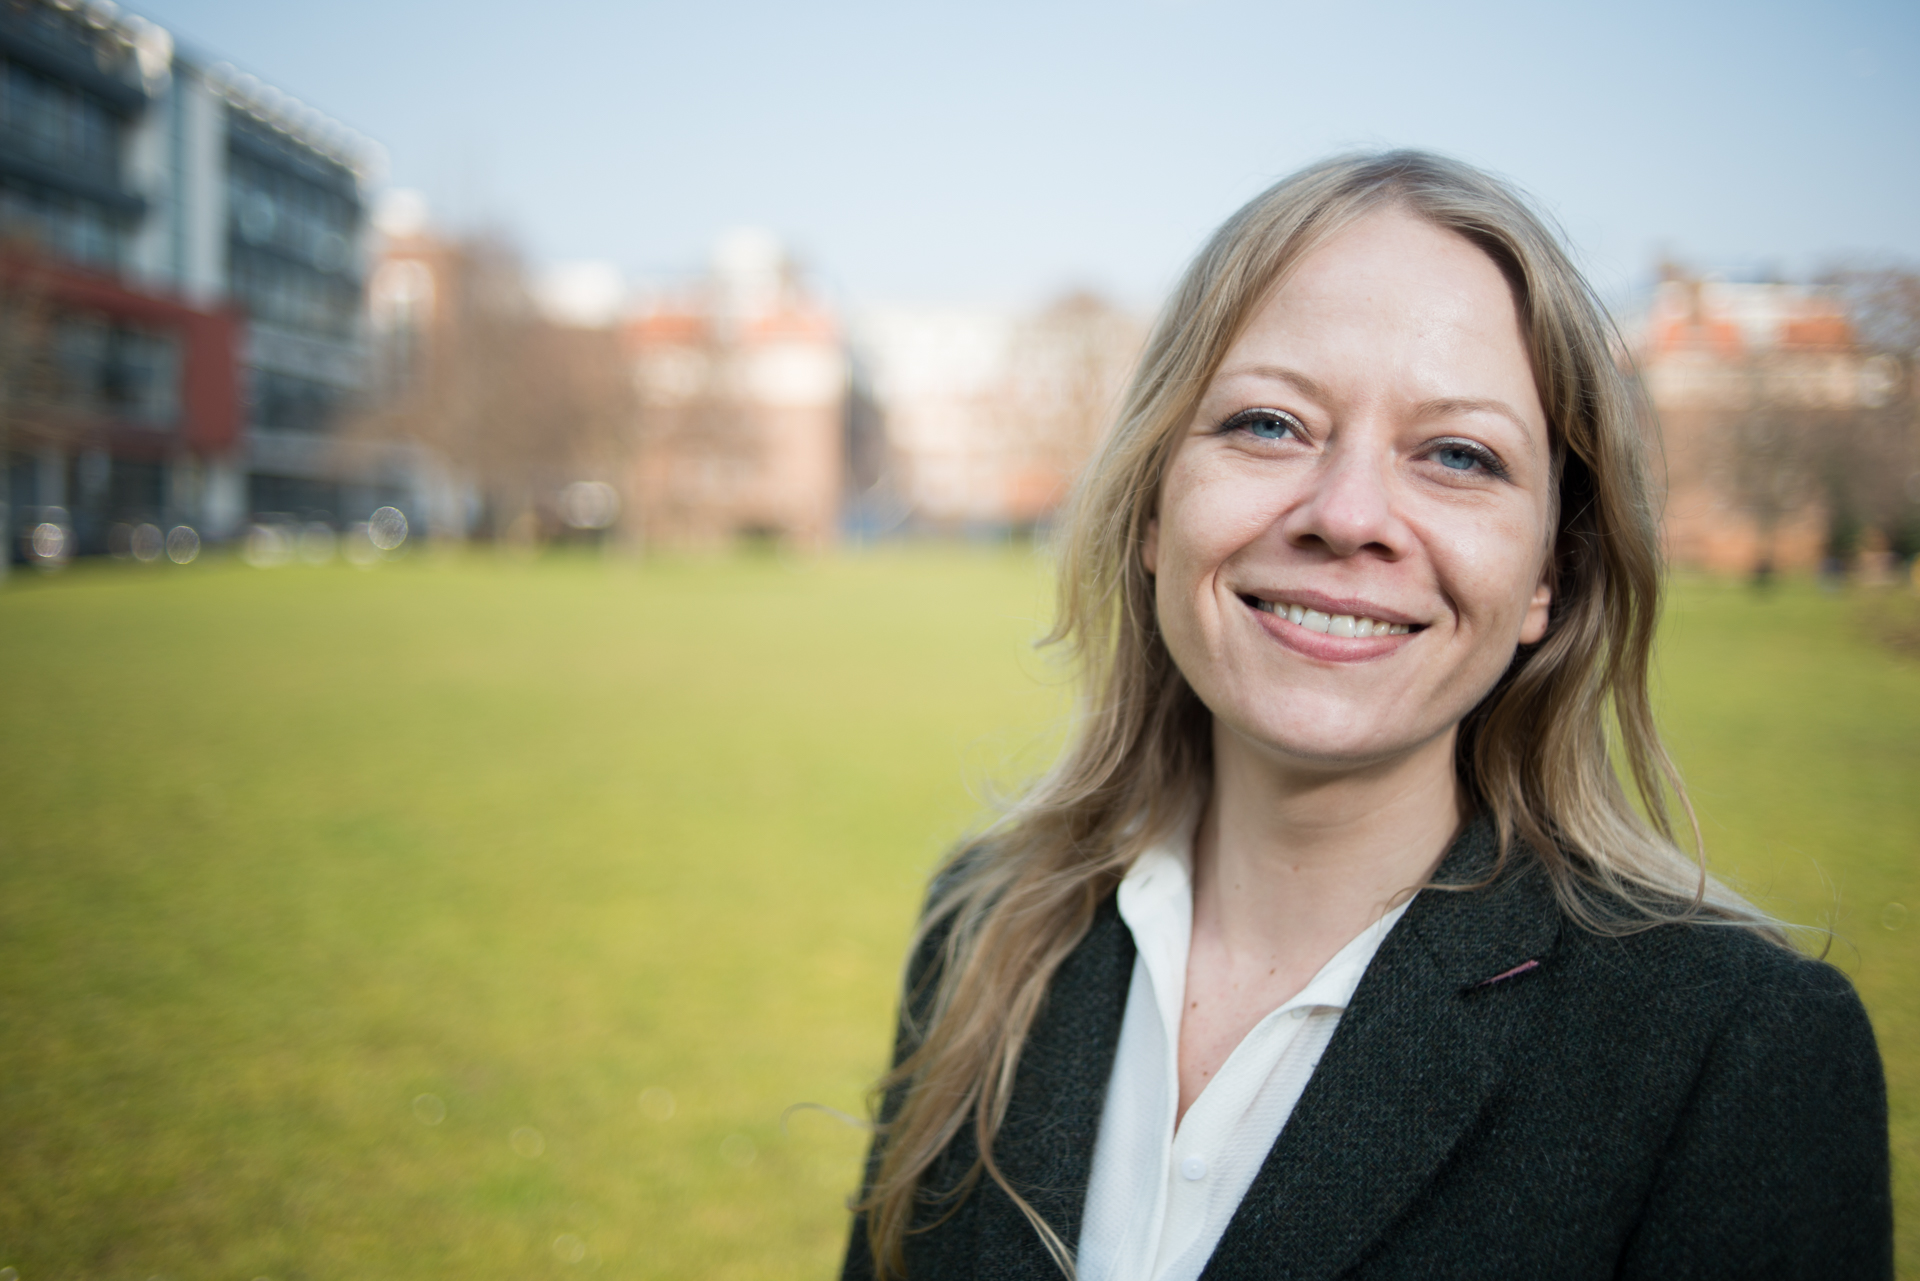 Portrait of Sian Berry - Green Party London Mayoral Candidate and London Assembly member